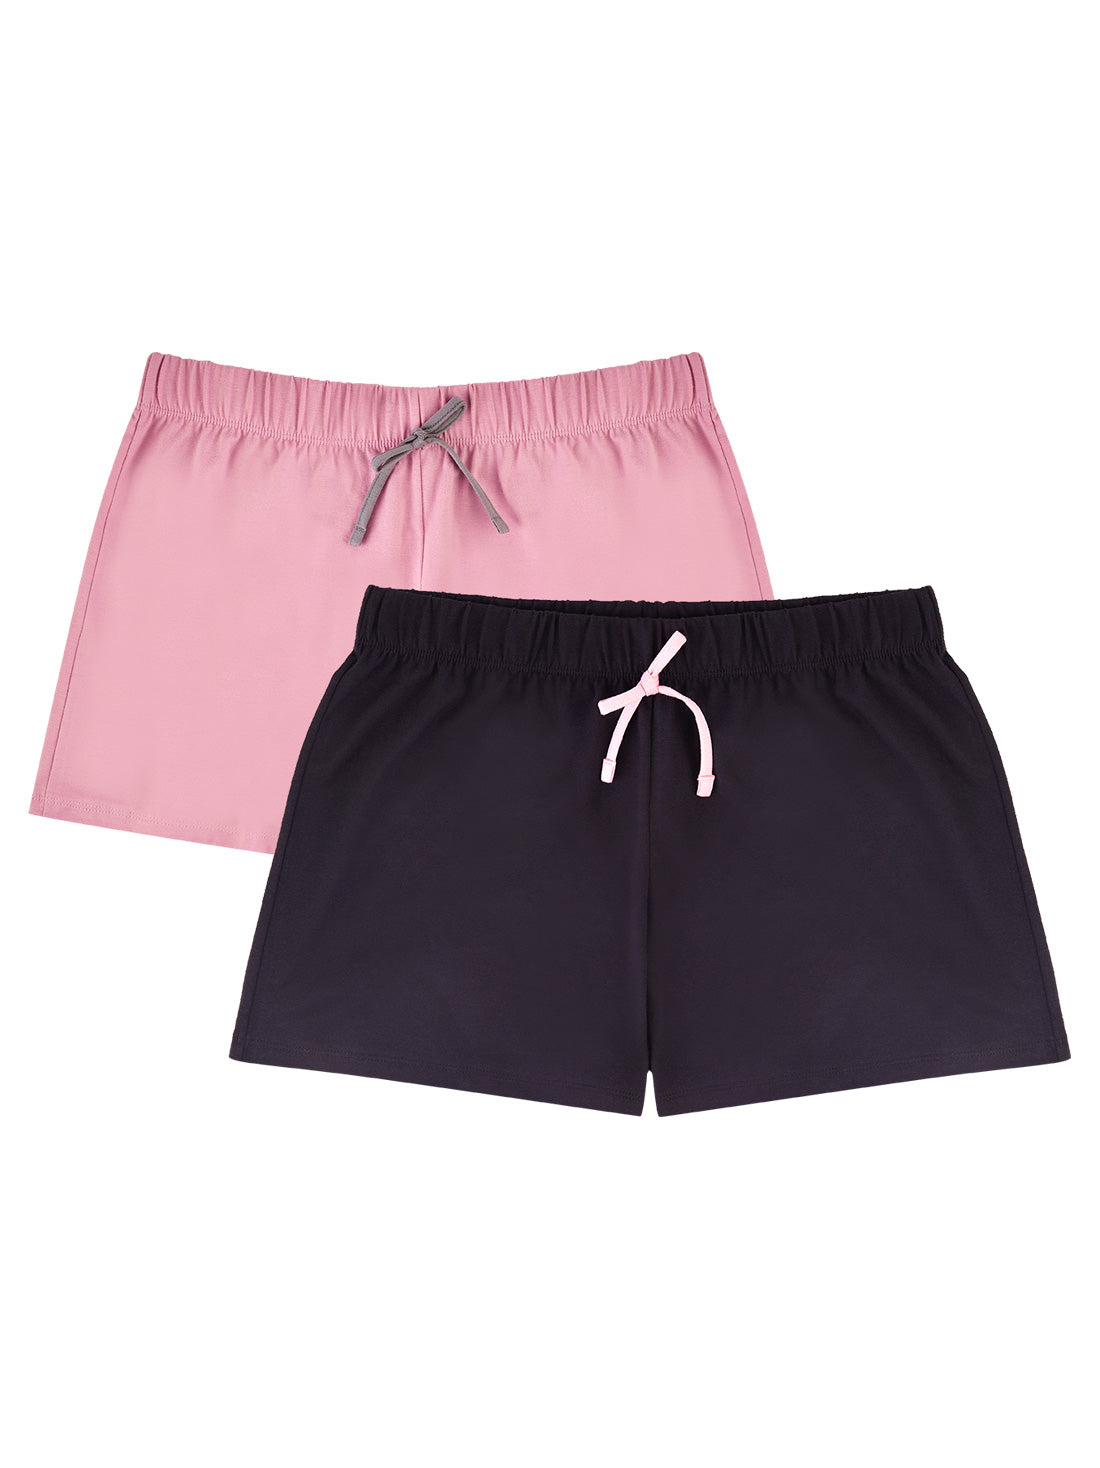 - Ilusion | & Shorts Two-Pack Affordable - 79019 Stylish!